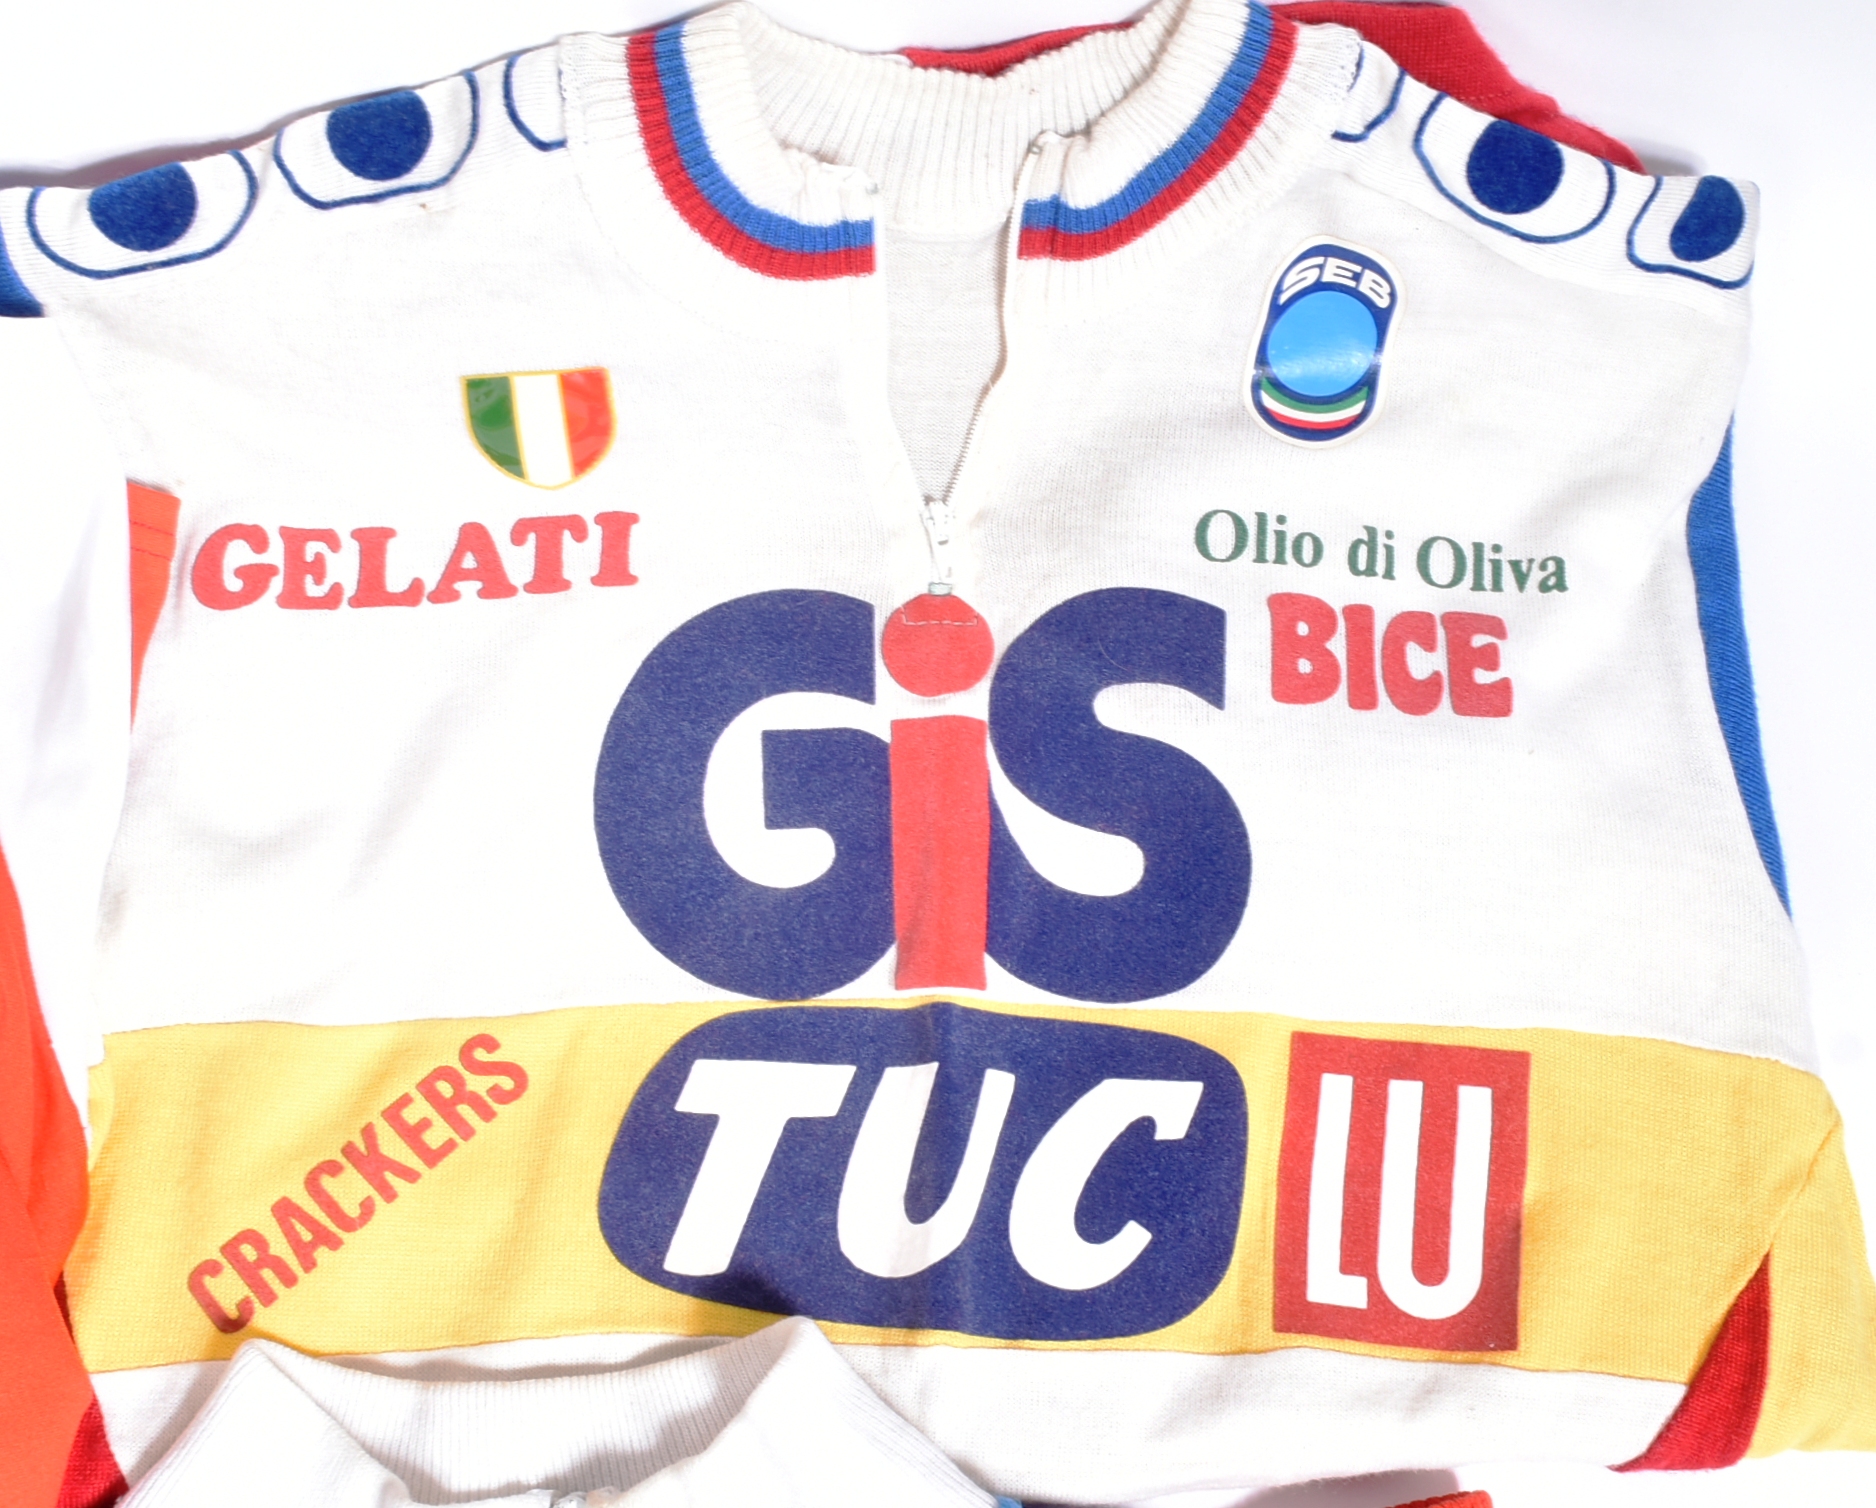 CYCLING - COLLECTION OF VINTAGE 1980S AUSTRALIAN CYCLING TOPS - Image 2 of 5